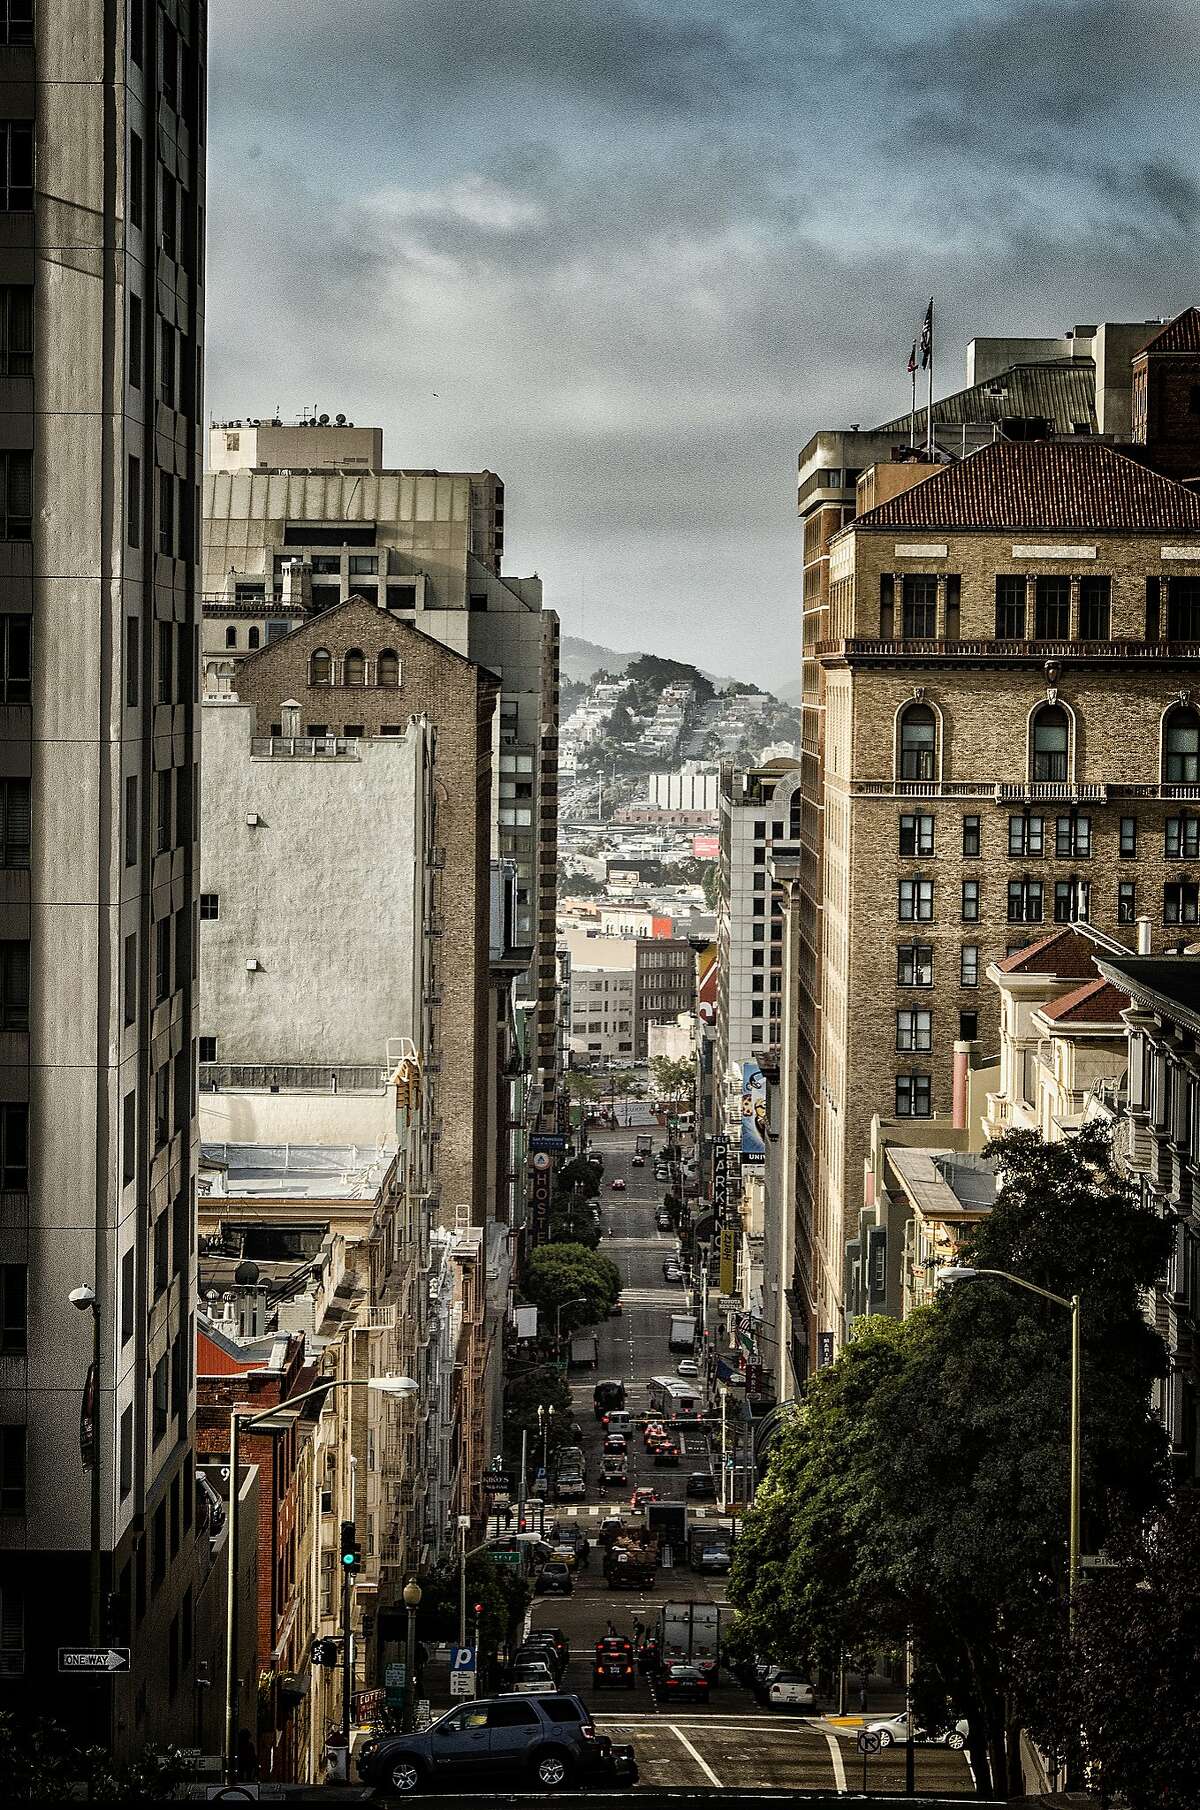 Mason Street drops from the ritzy heights of Nob Hill to the edge of the Tenderloin, just six steep blocks down.